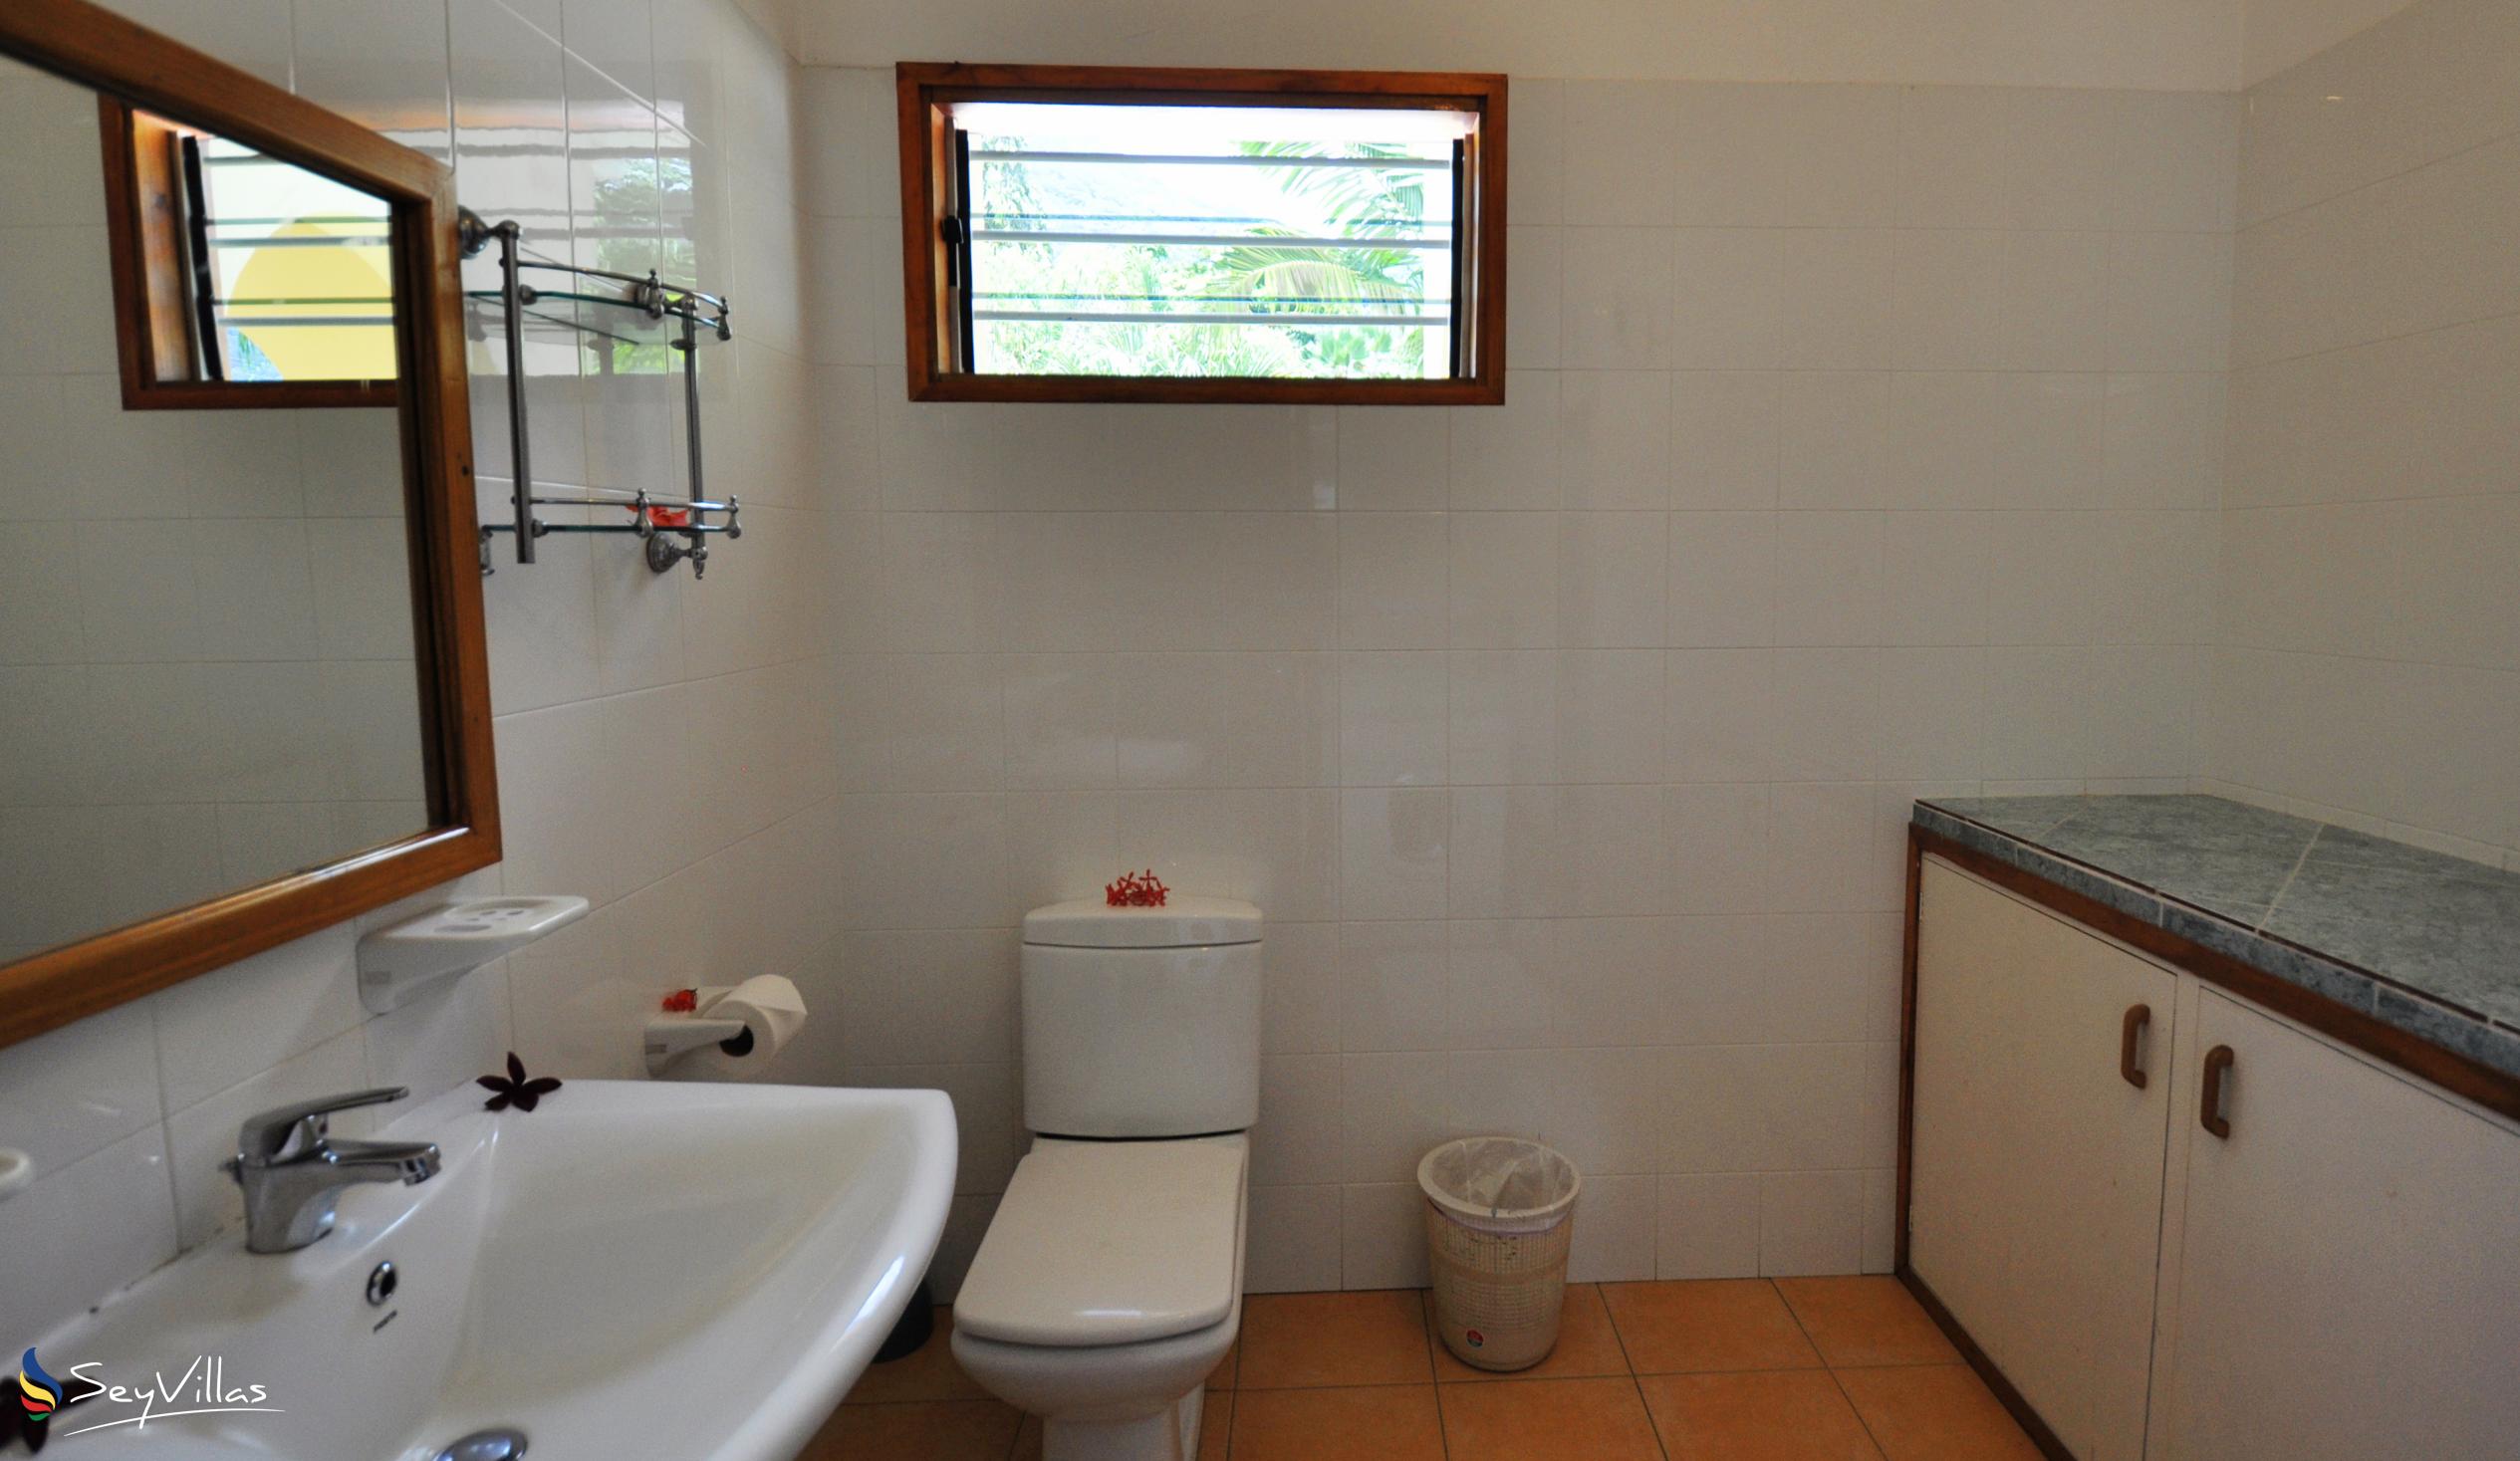 Photo 52: GT Selfcatering Apartments - Apartment - Mahé (Seychelles)